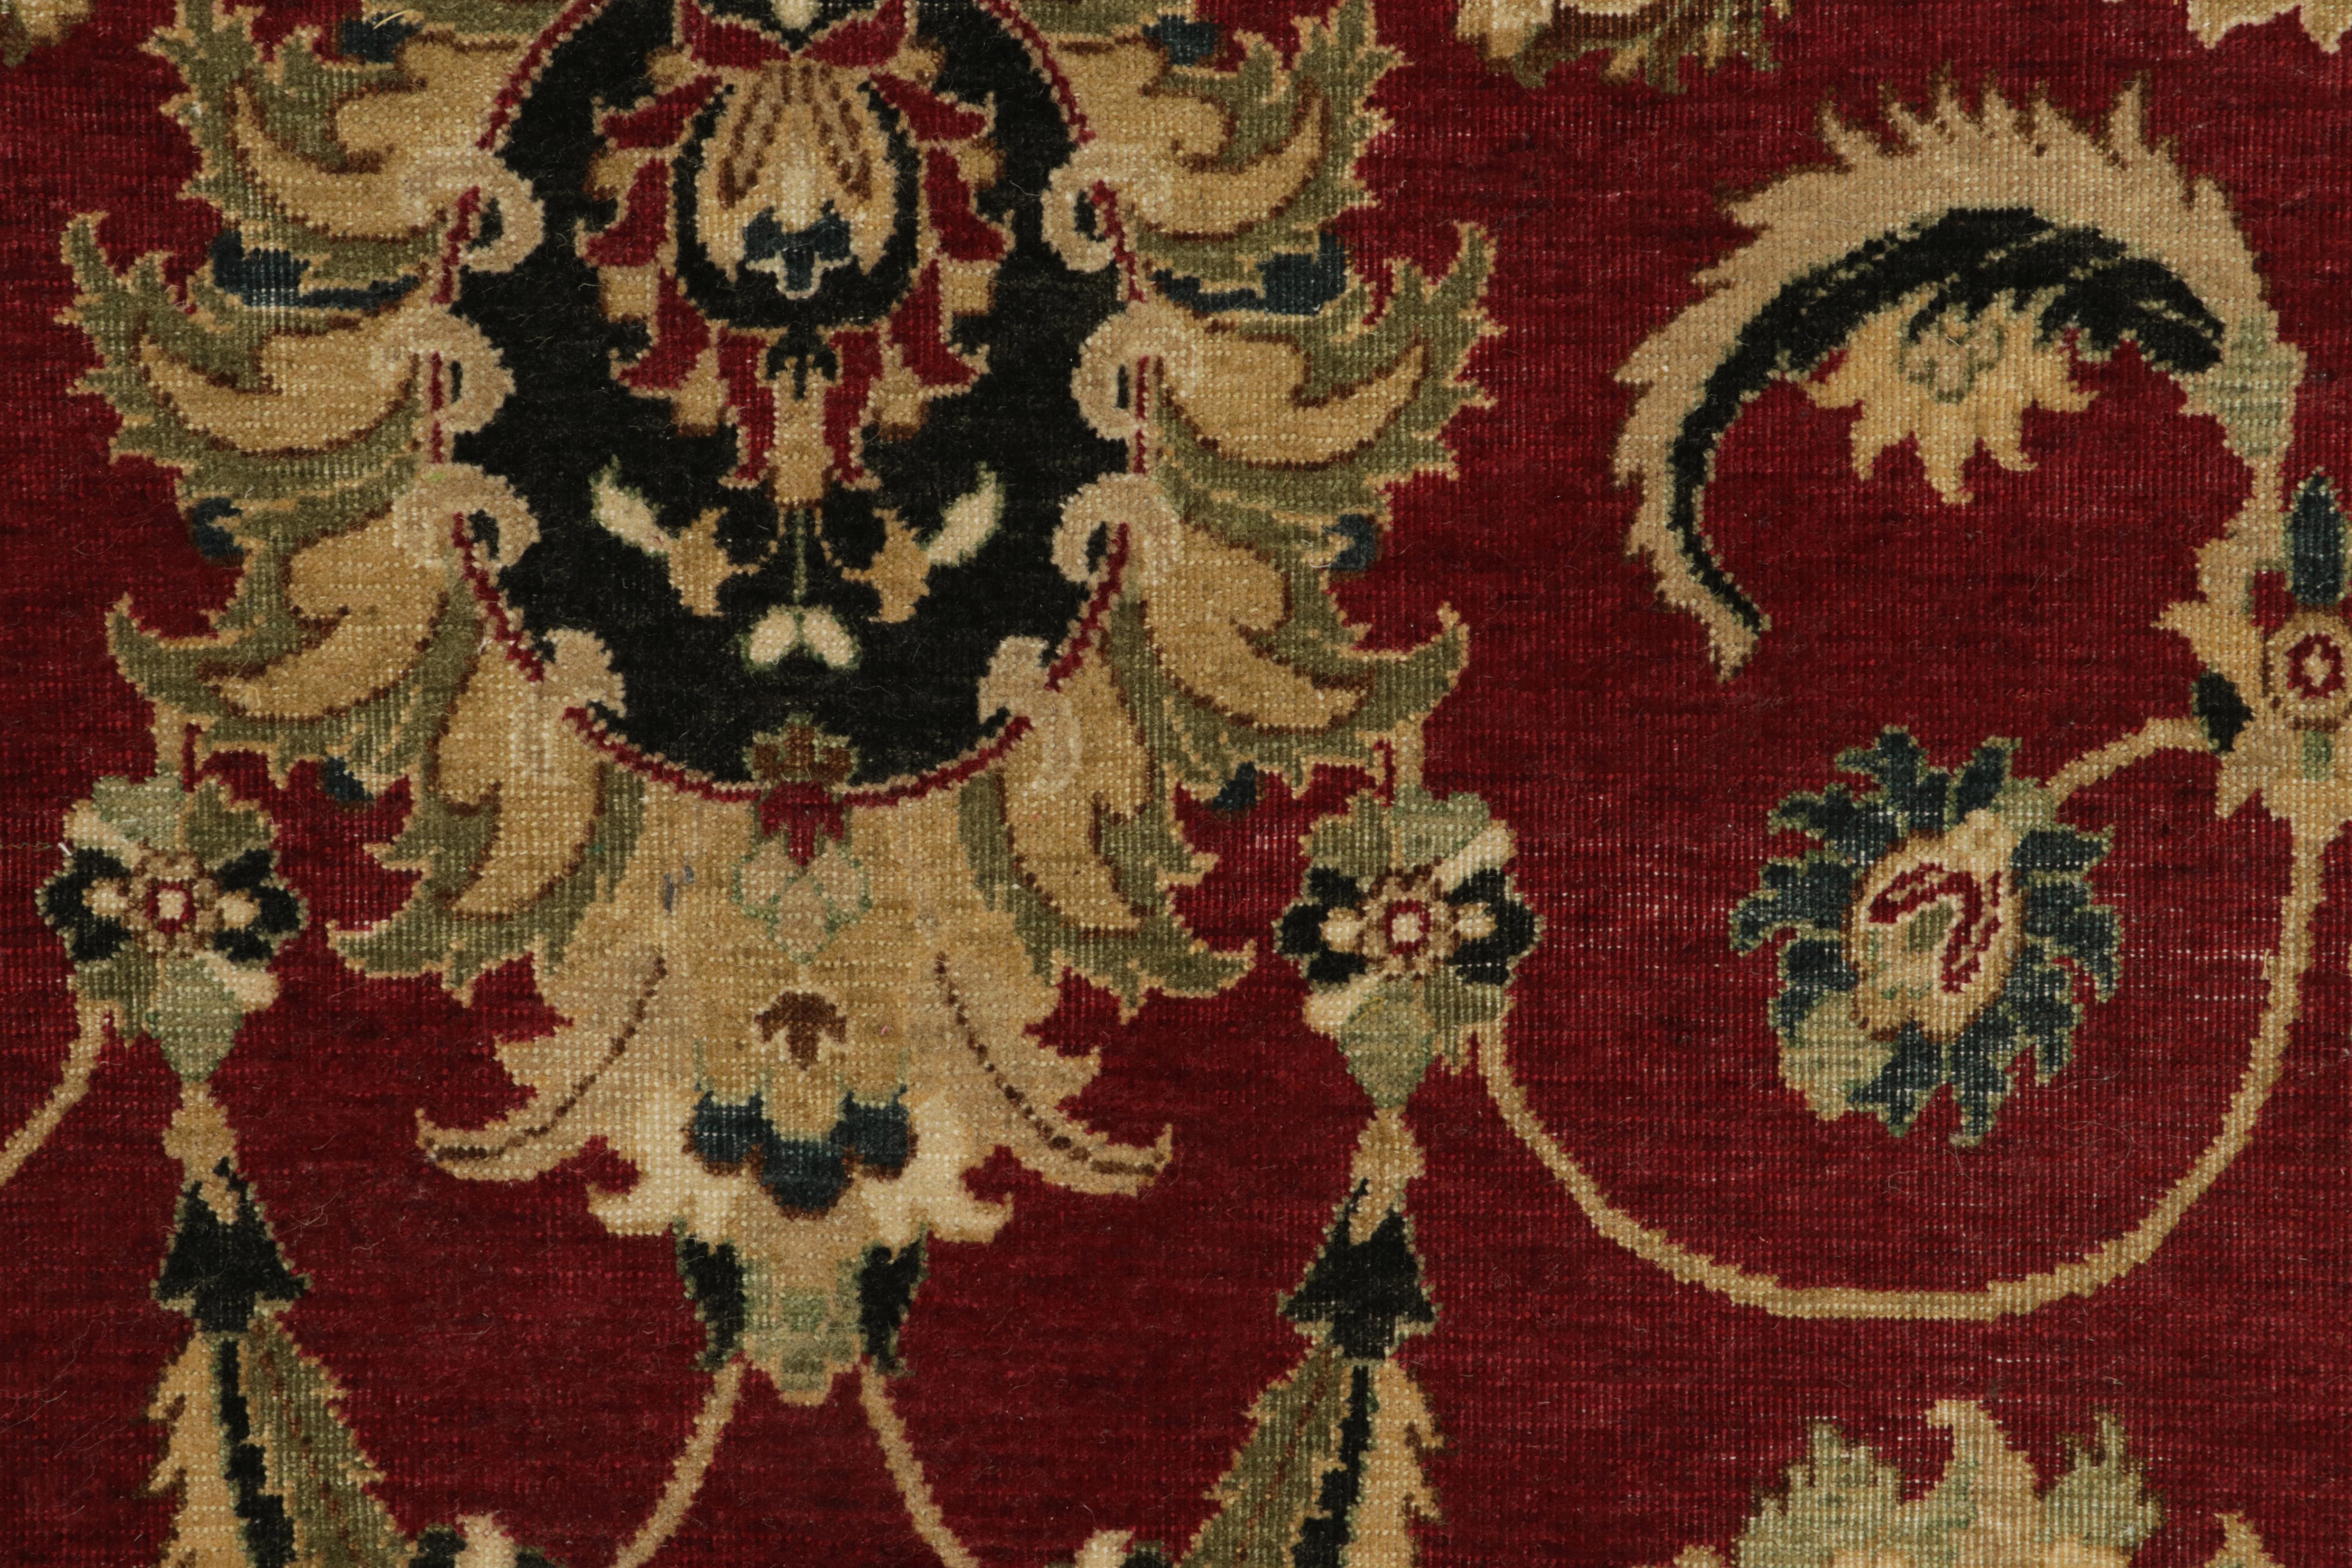 Contemporary Rug & Kilim's 17th-Century Inspired Rug in Burgundy, Gold & Green Florals For Sale